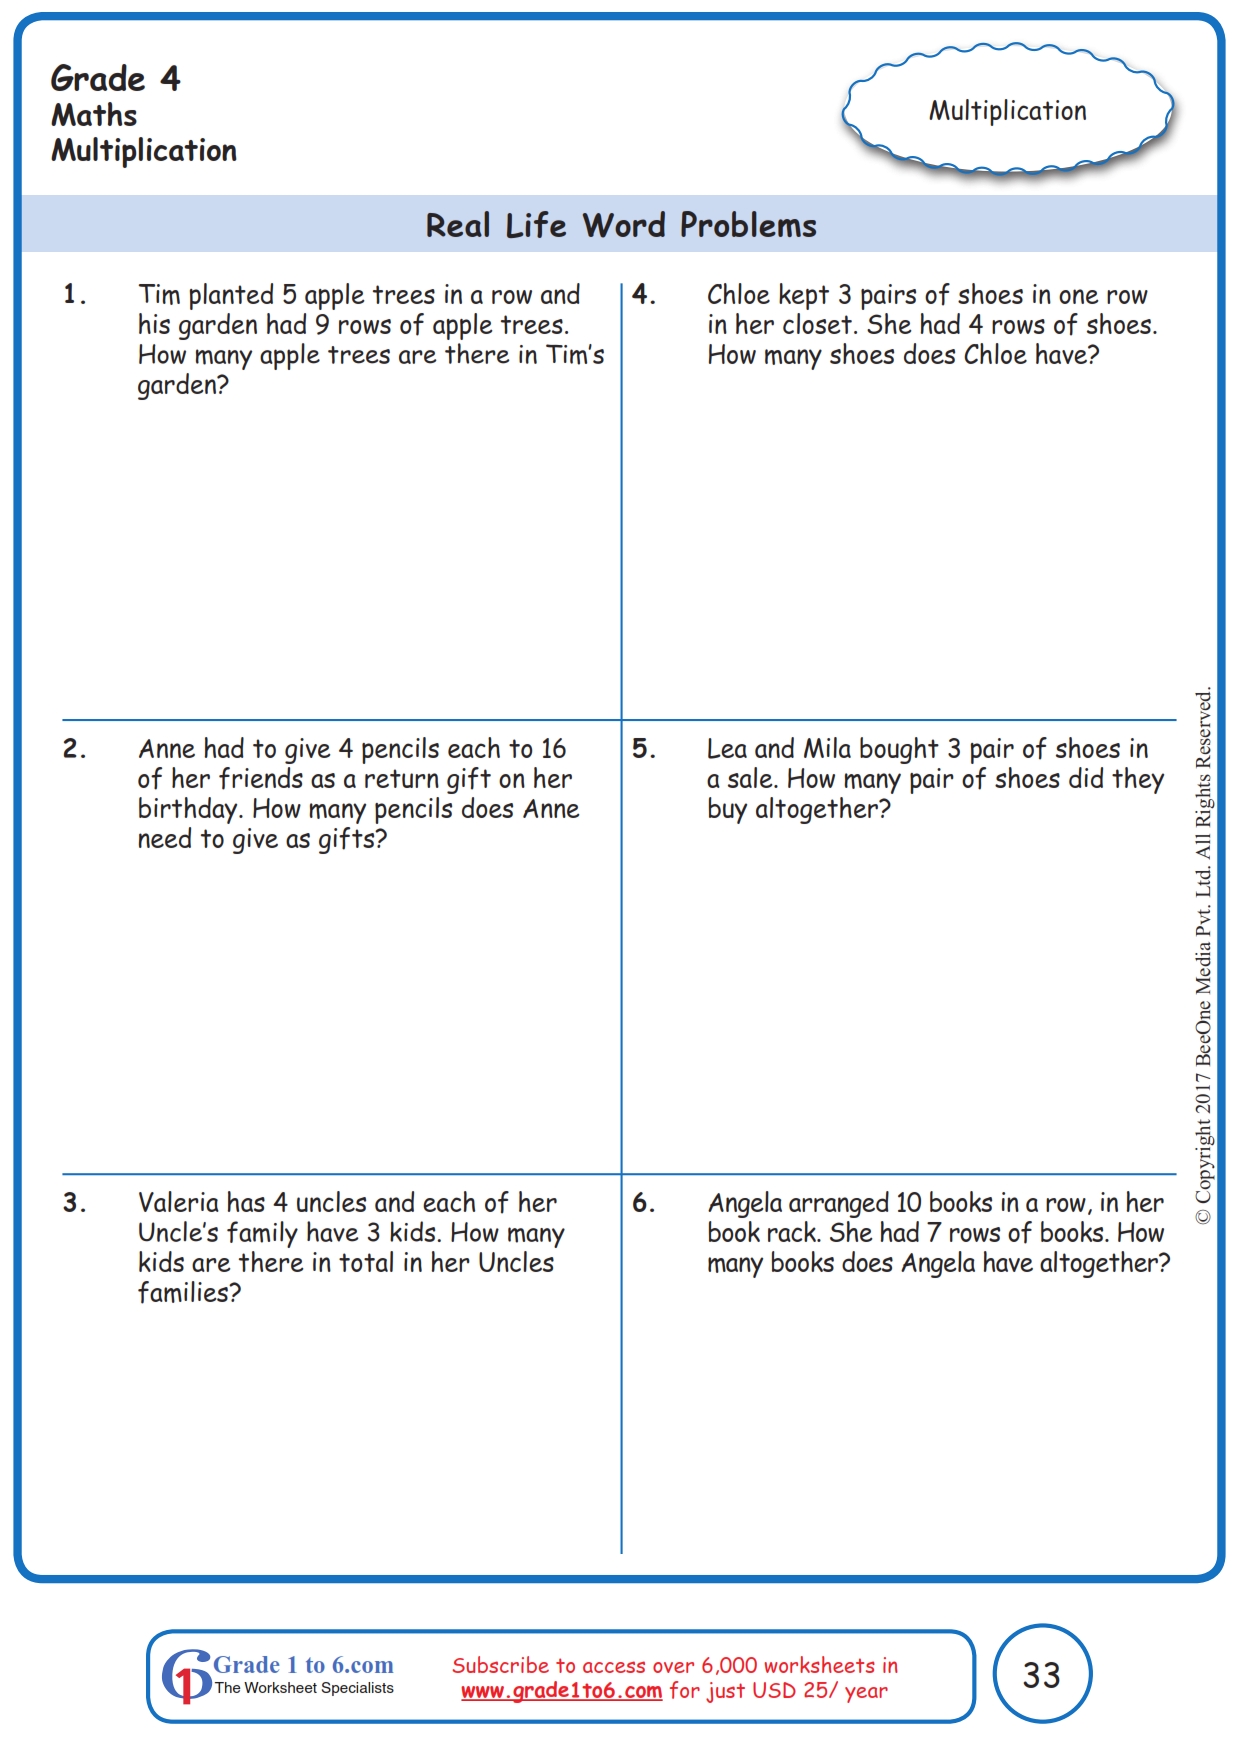 Grade 4 Word Problems on Multiplication Worksheets|www.grade1to6.com